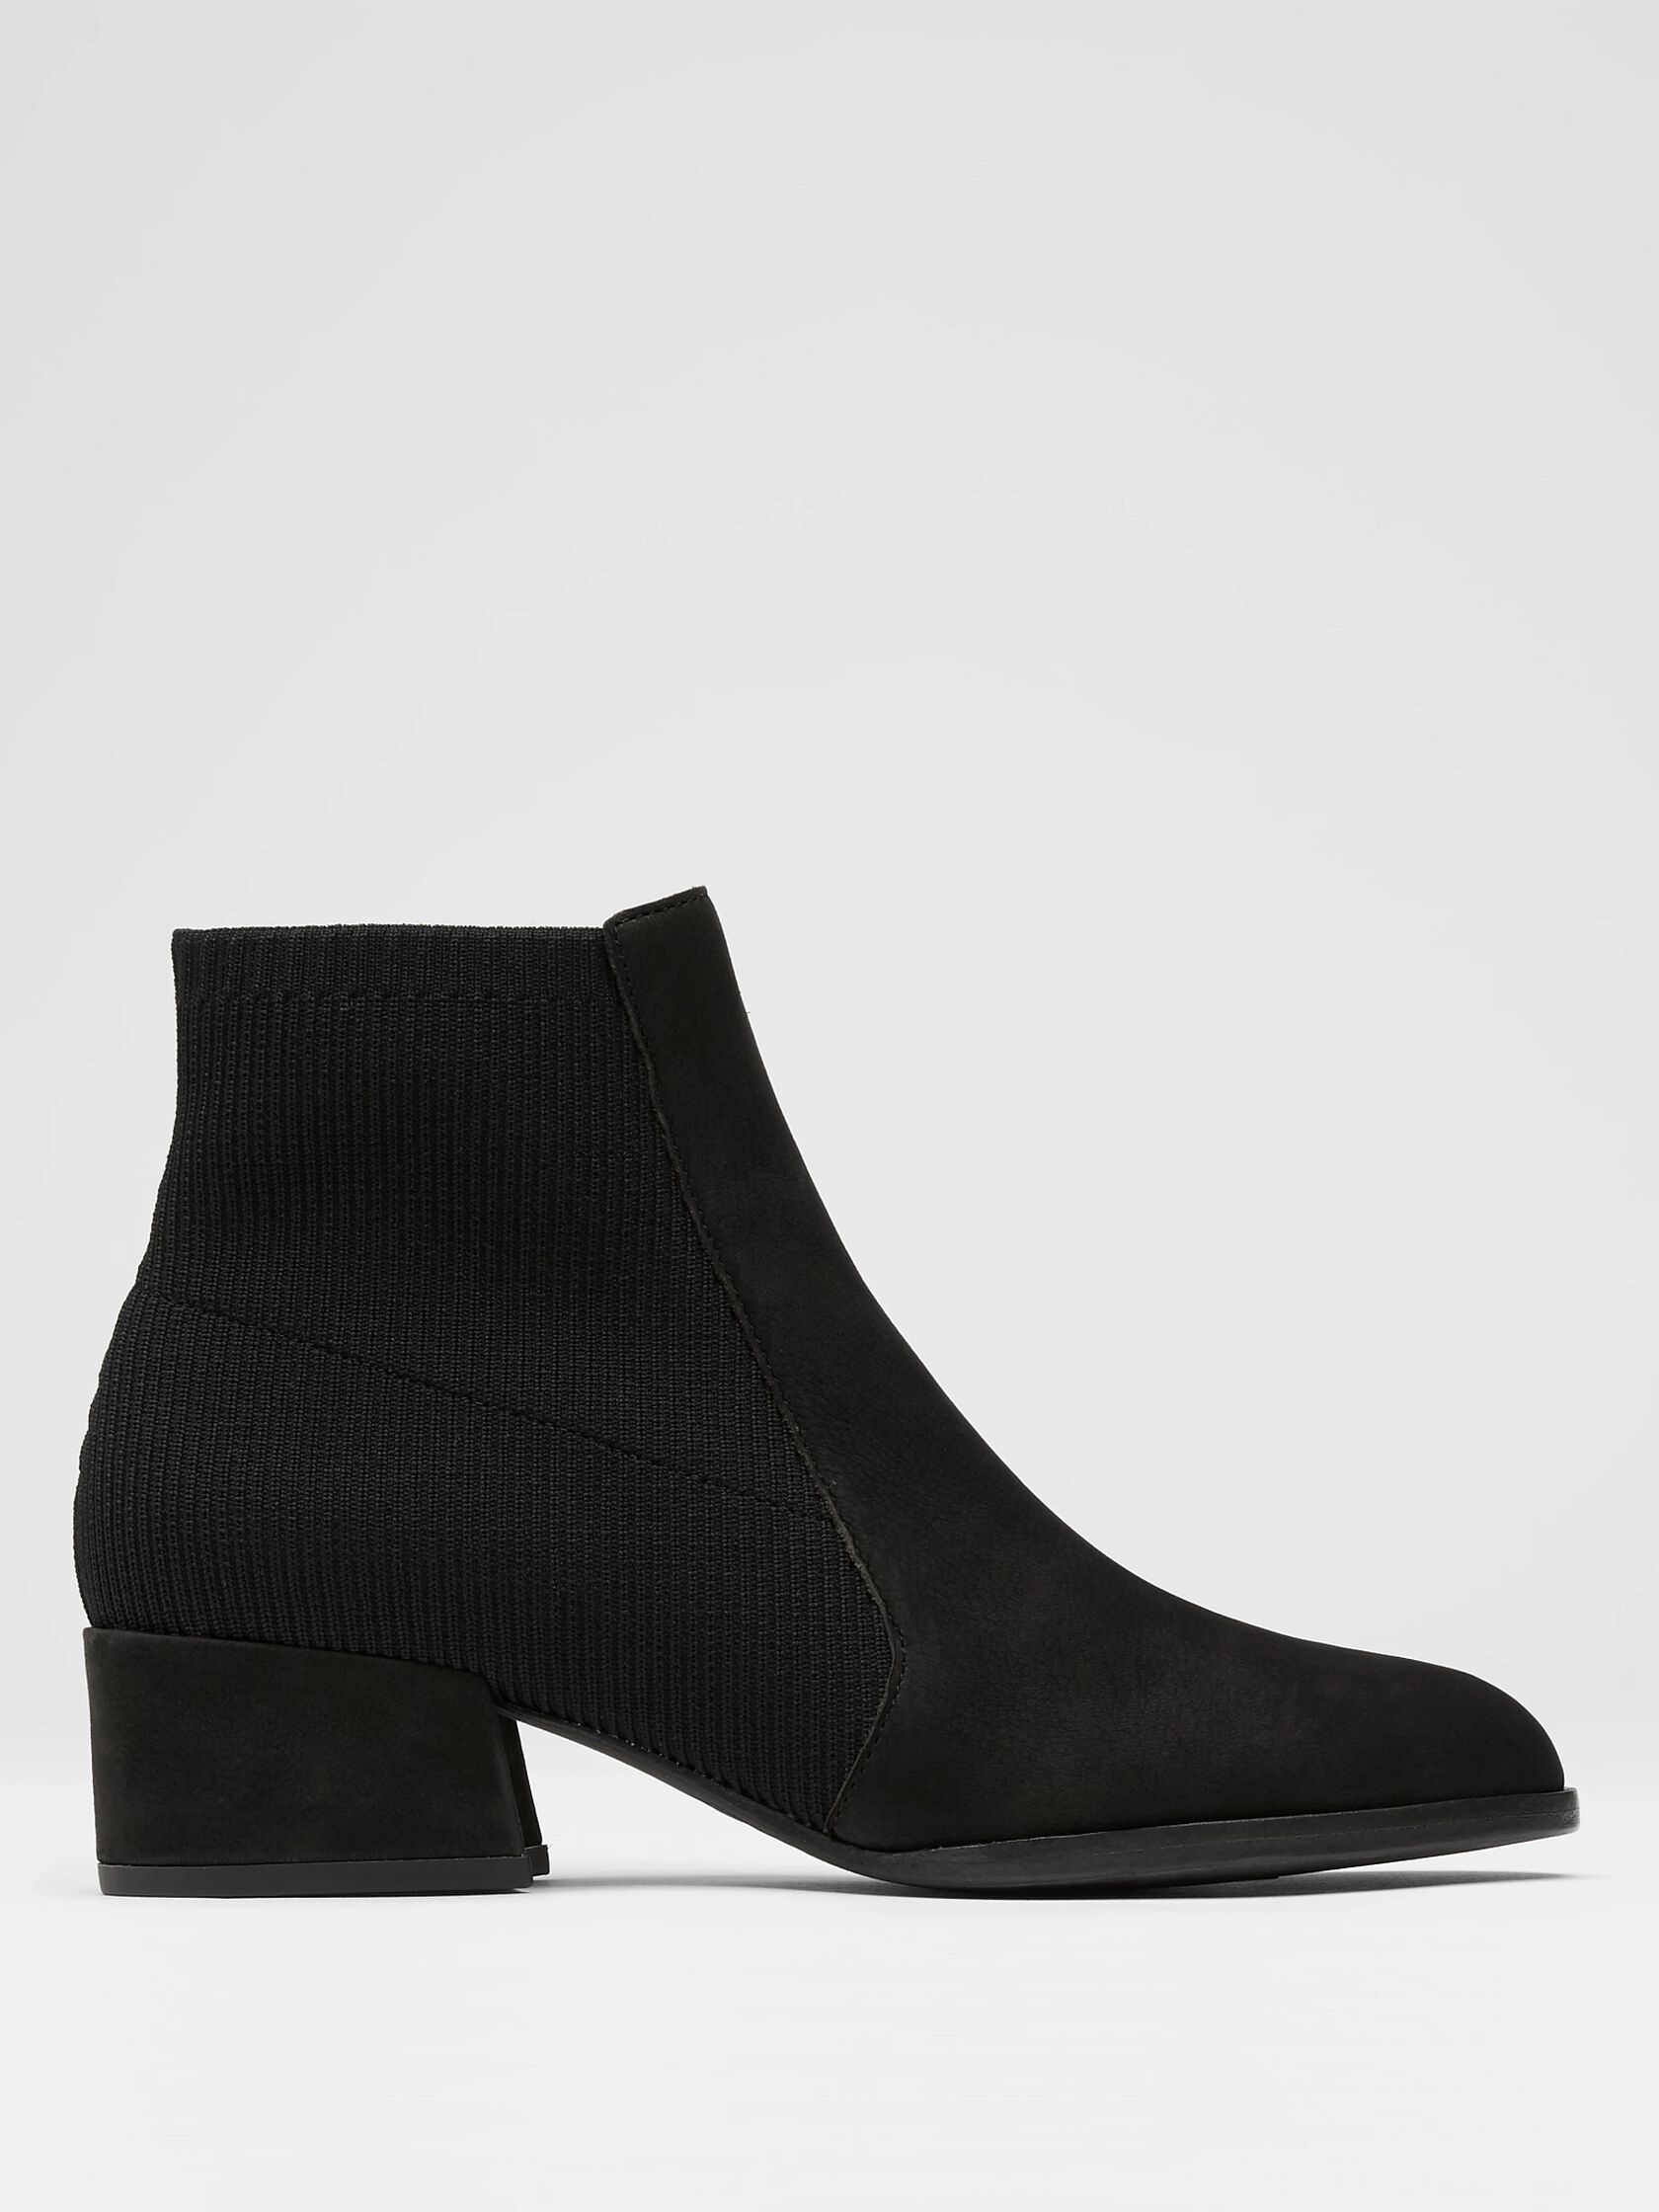 Aesop Tumbled Nubuck & Recycled Stretch Knit Bootie